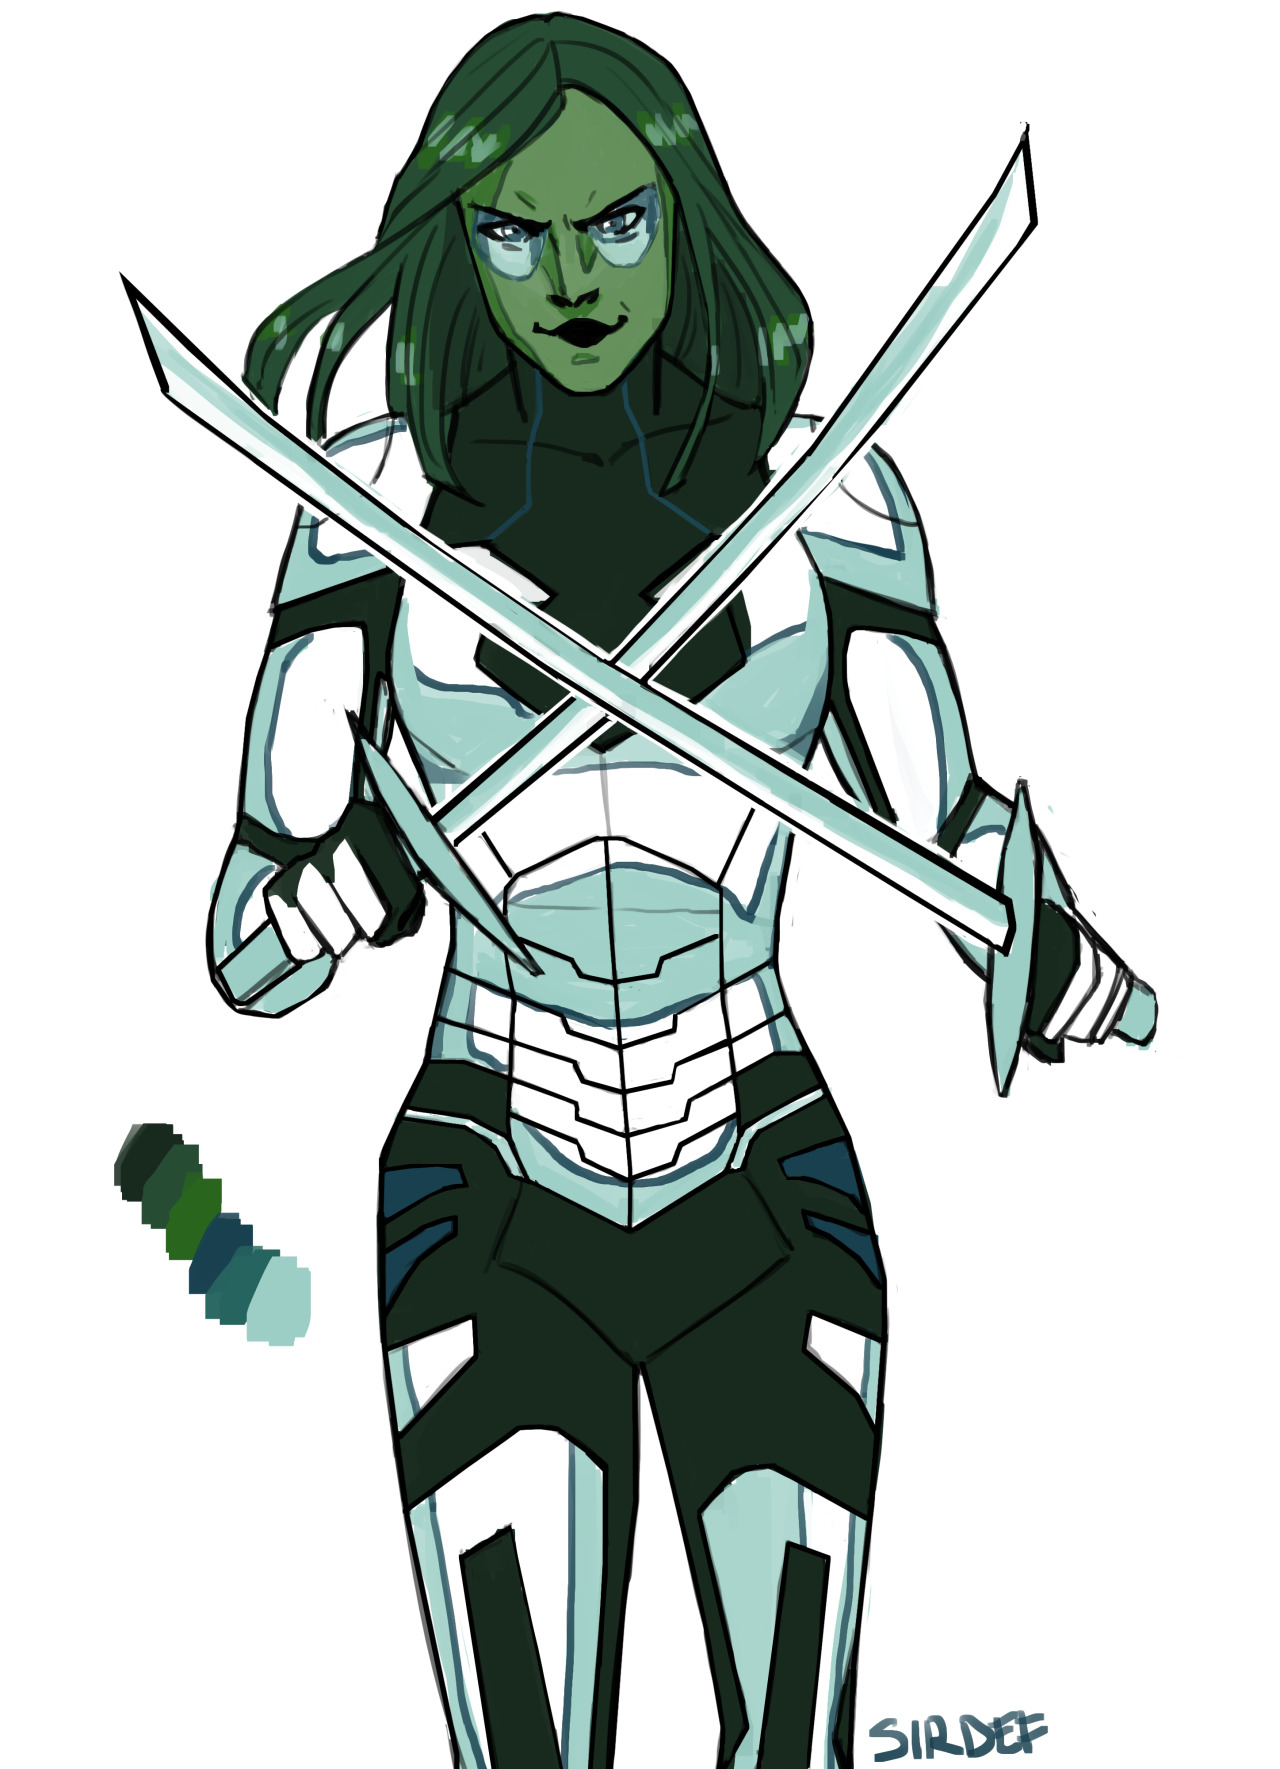 sirdef:
“Gamora in #30, commissioned by clockworkgate!
”
A little disappointed that this isn’t the look of on-screen Gamora, but as long as there’s ass-kicking, I’m totally fine!